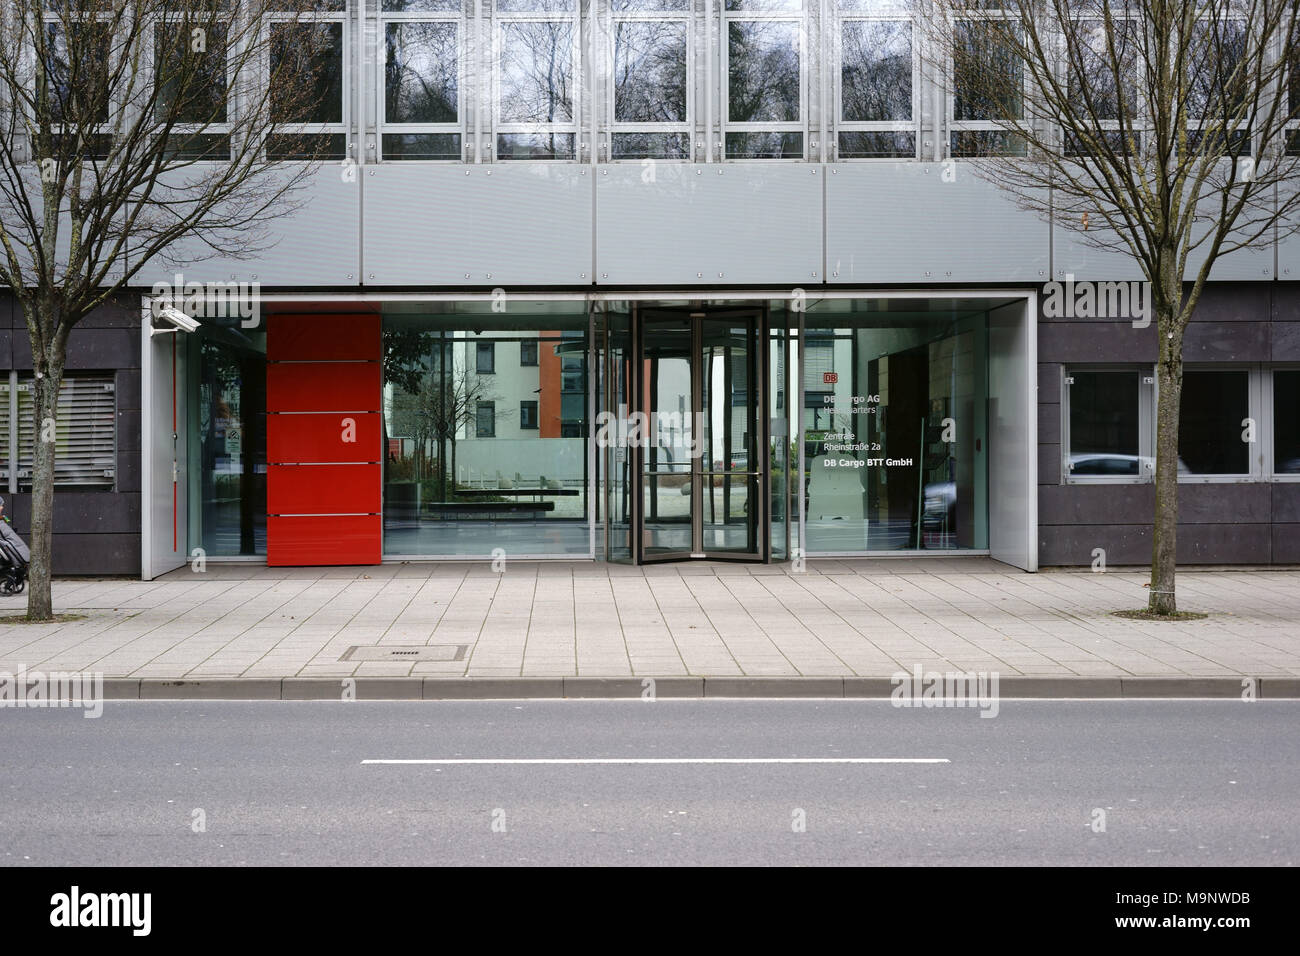 Mainz, Germany - March 17, 2018: The glass entrance of DB Cargo AG headquarters in Mainz with a modern entrance with revolving door on March 17, 2018  Stock Photo